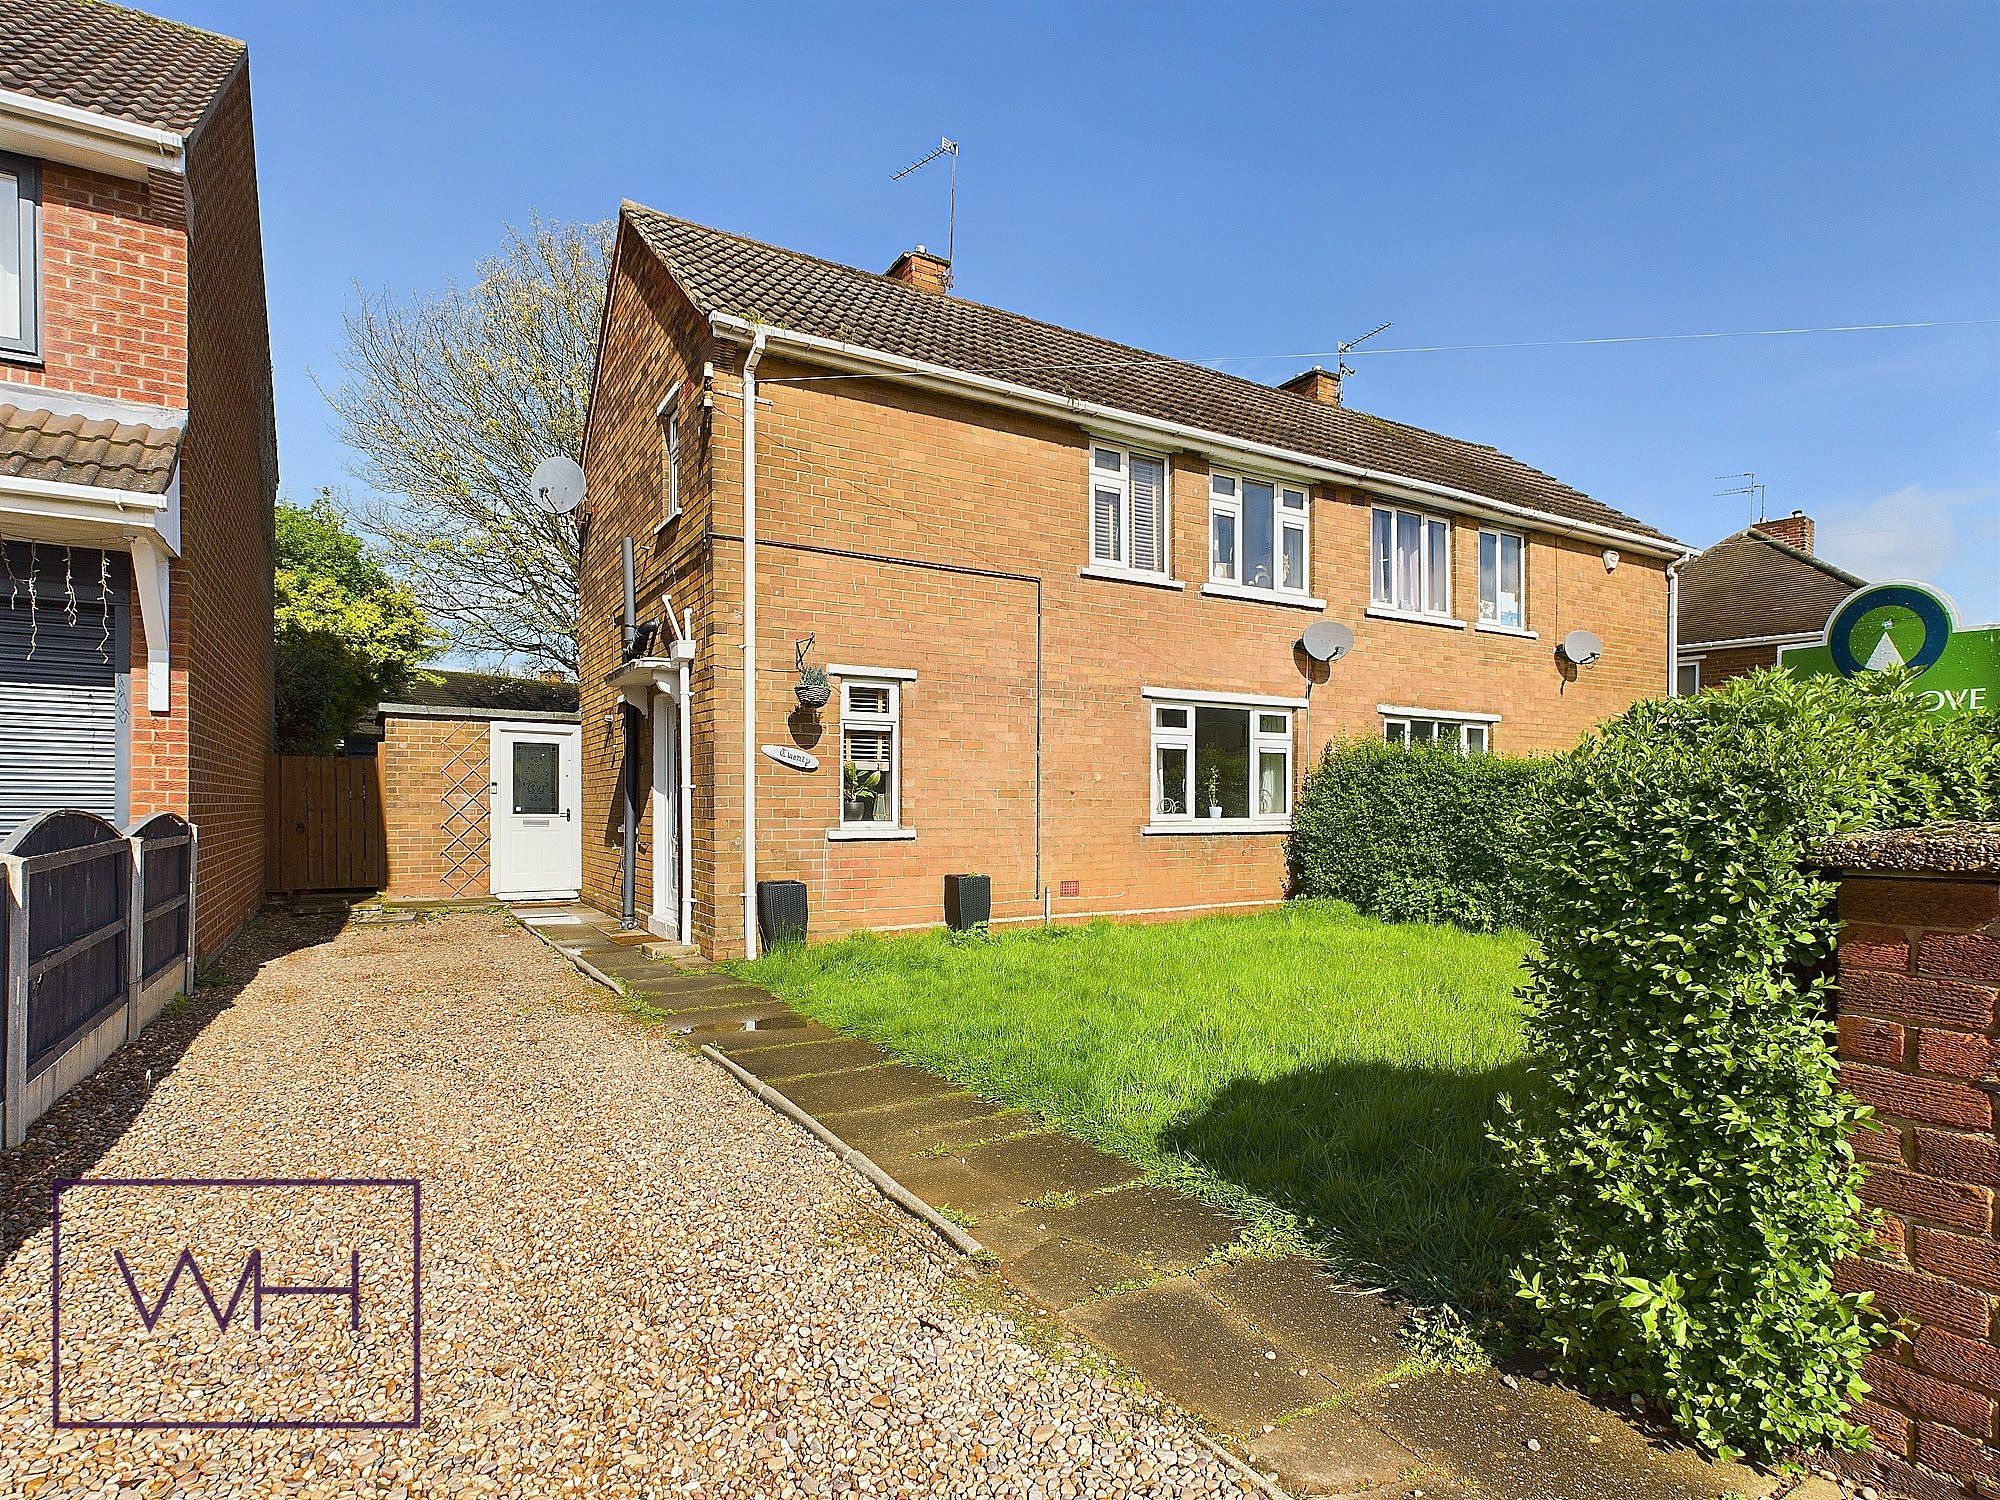 Cromwell Drive , Sprotbrough, Doncaster , DN5 8DG